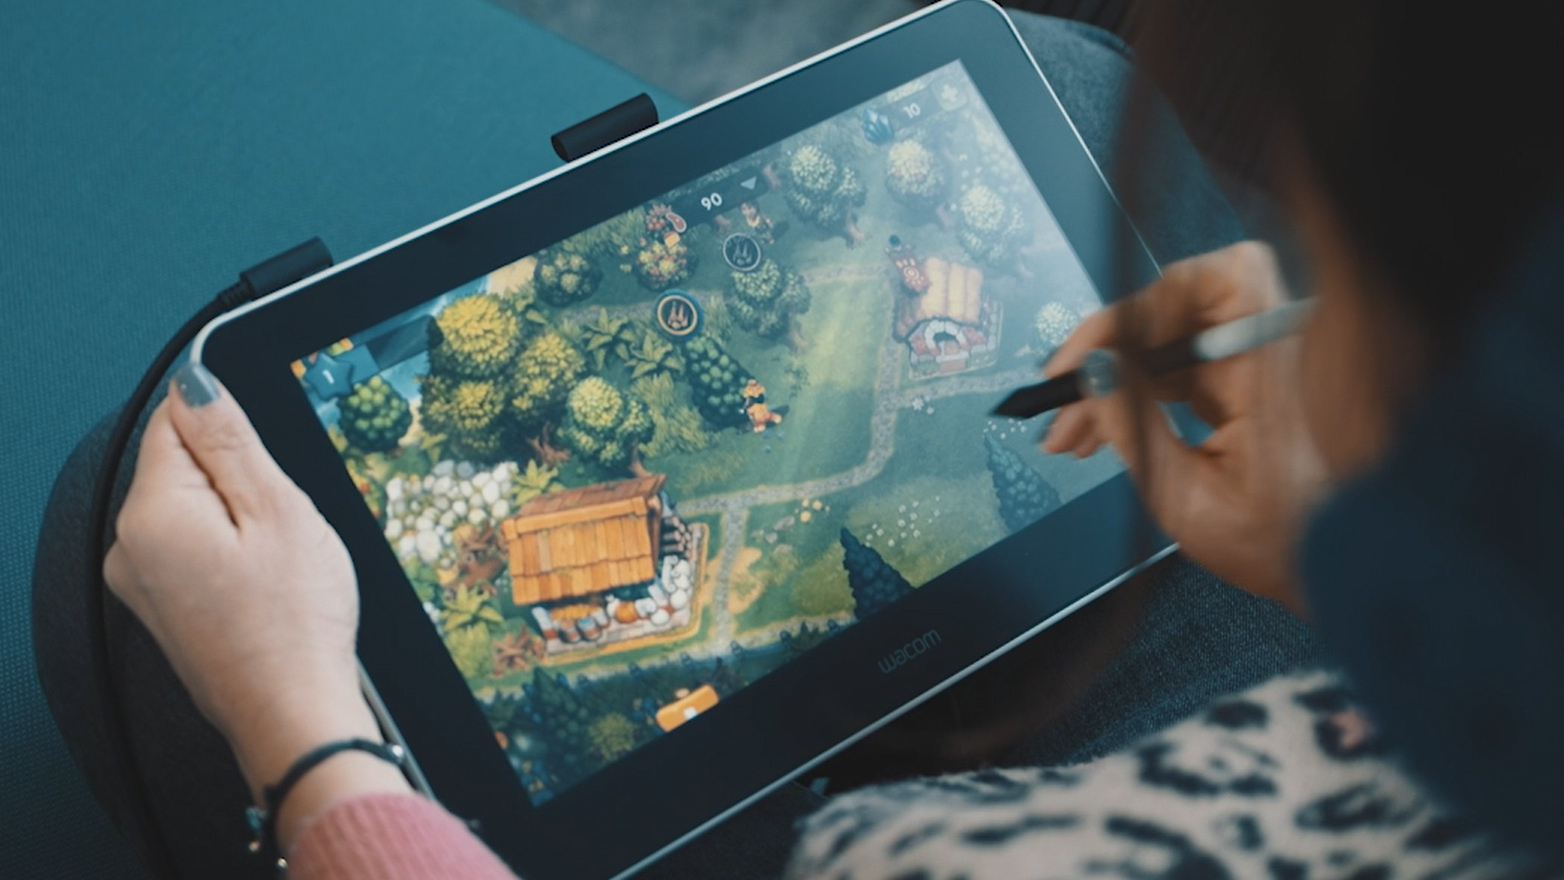 Wacom One second screen gaming on smartphone